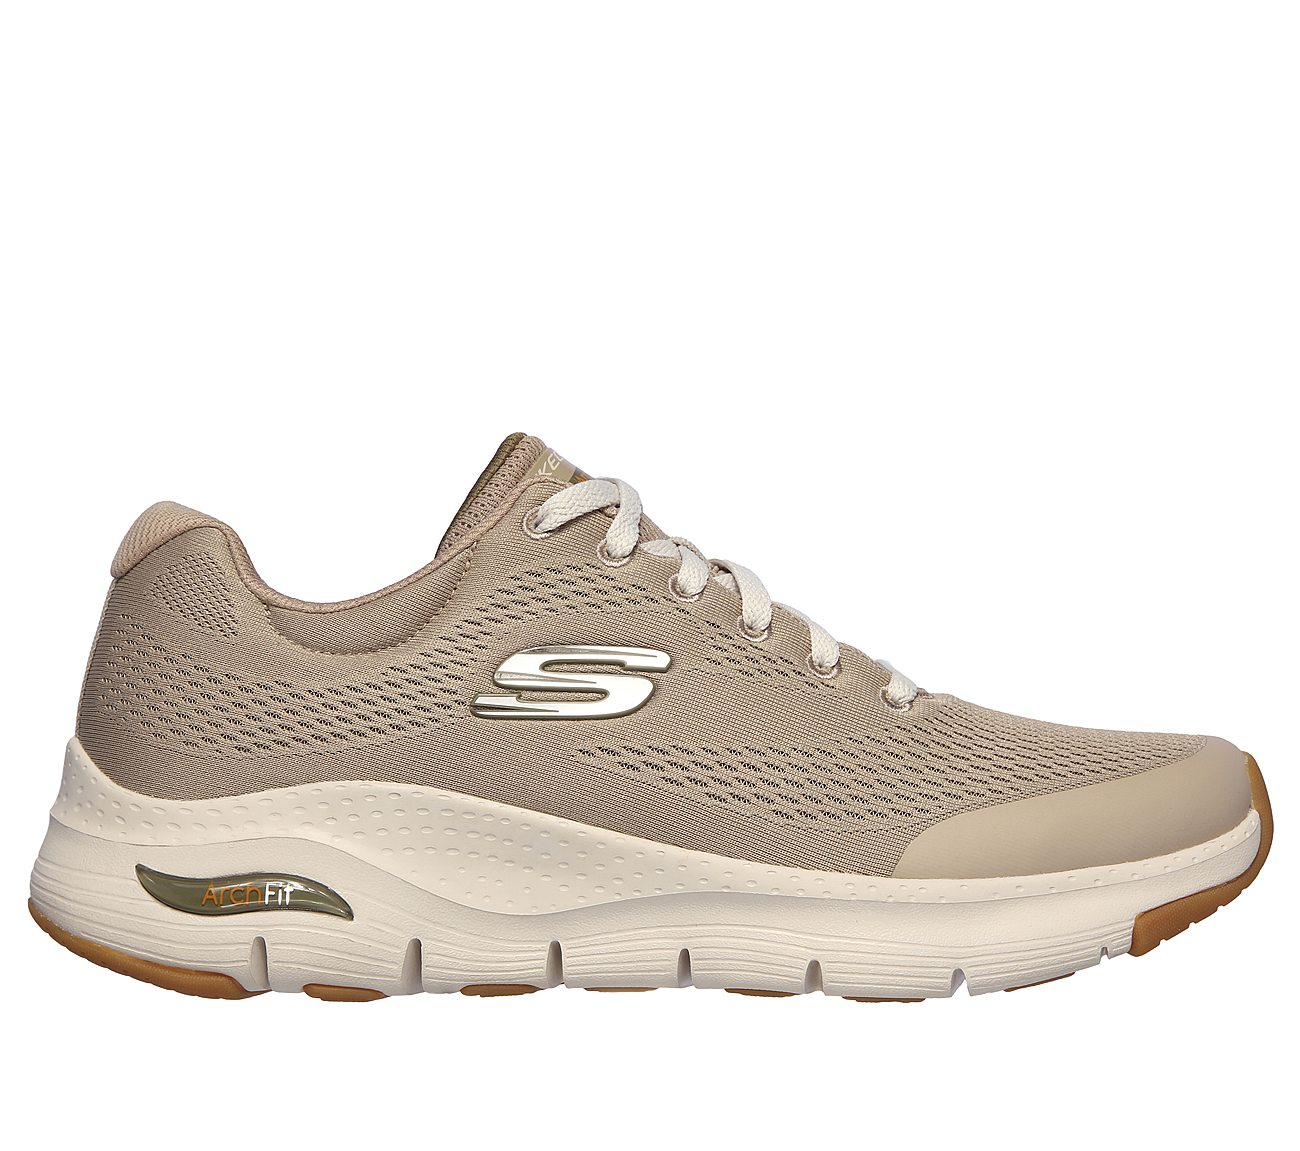 Skechers Arch Fit Skechers Arch Fit Shoes